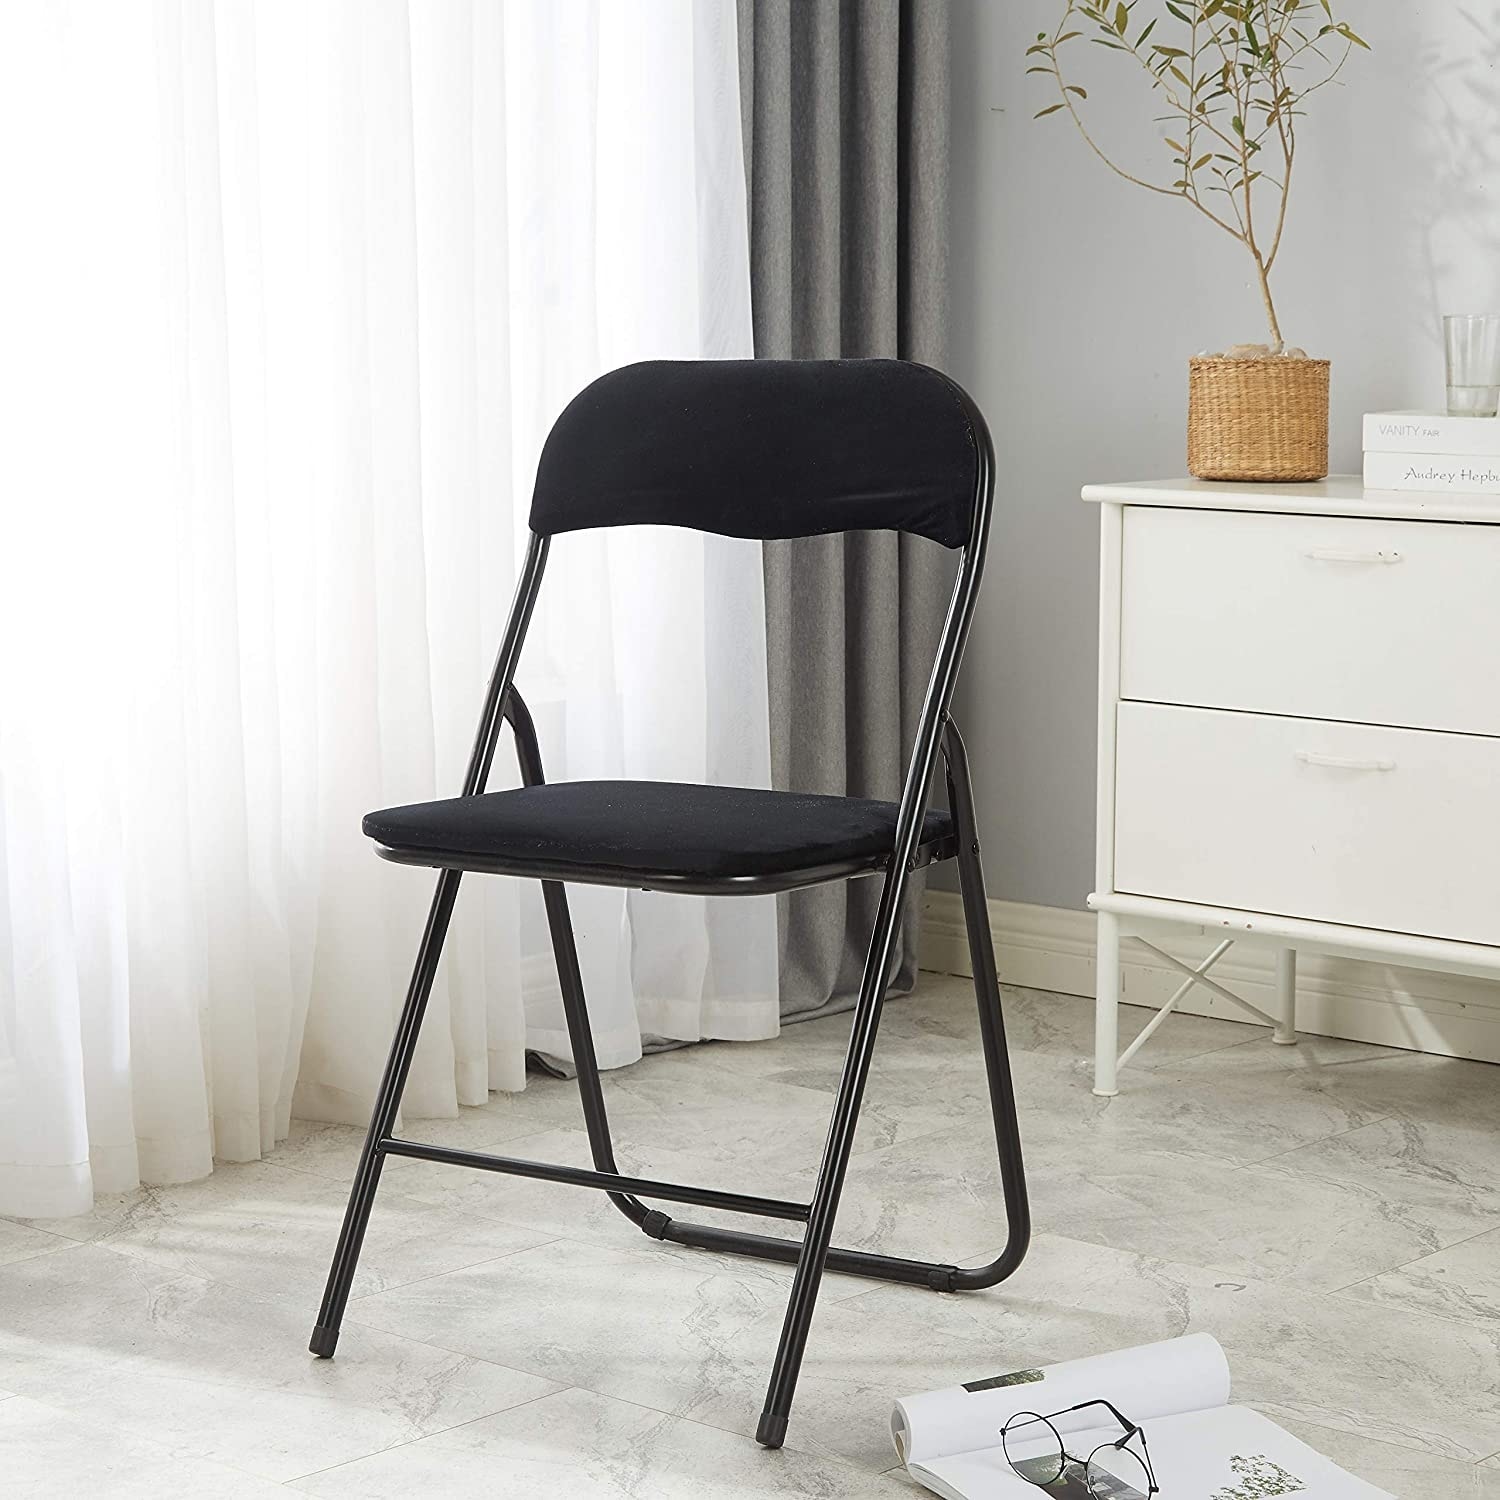 https://ak1.ostkcdn.com/images/products/is/images/direct/7e5b054faf4fbd0c75ad094162f0868fd8279c2c/Everly-Quinn-Velvet-Padded-Folding-Chair.jpg